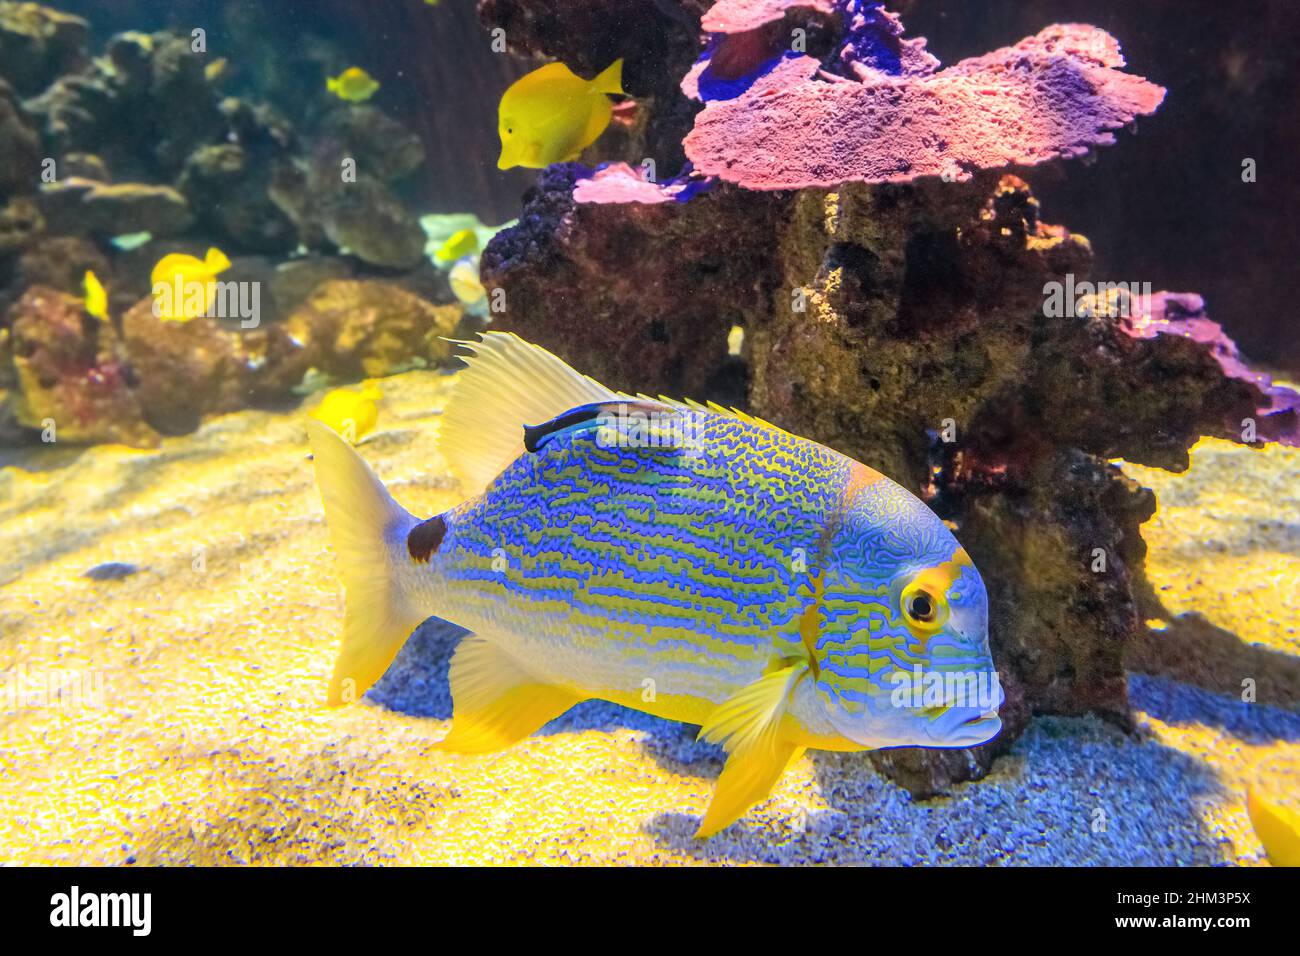 Close up of a Sailfin snapper fish or blue-lined sea bream in coral reef. Symphorichthys spilurus species living in Indian Ocean and western Pacific Stock Photo